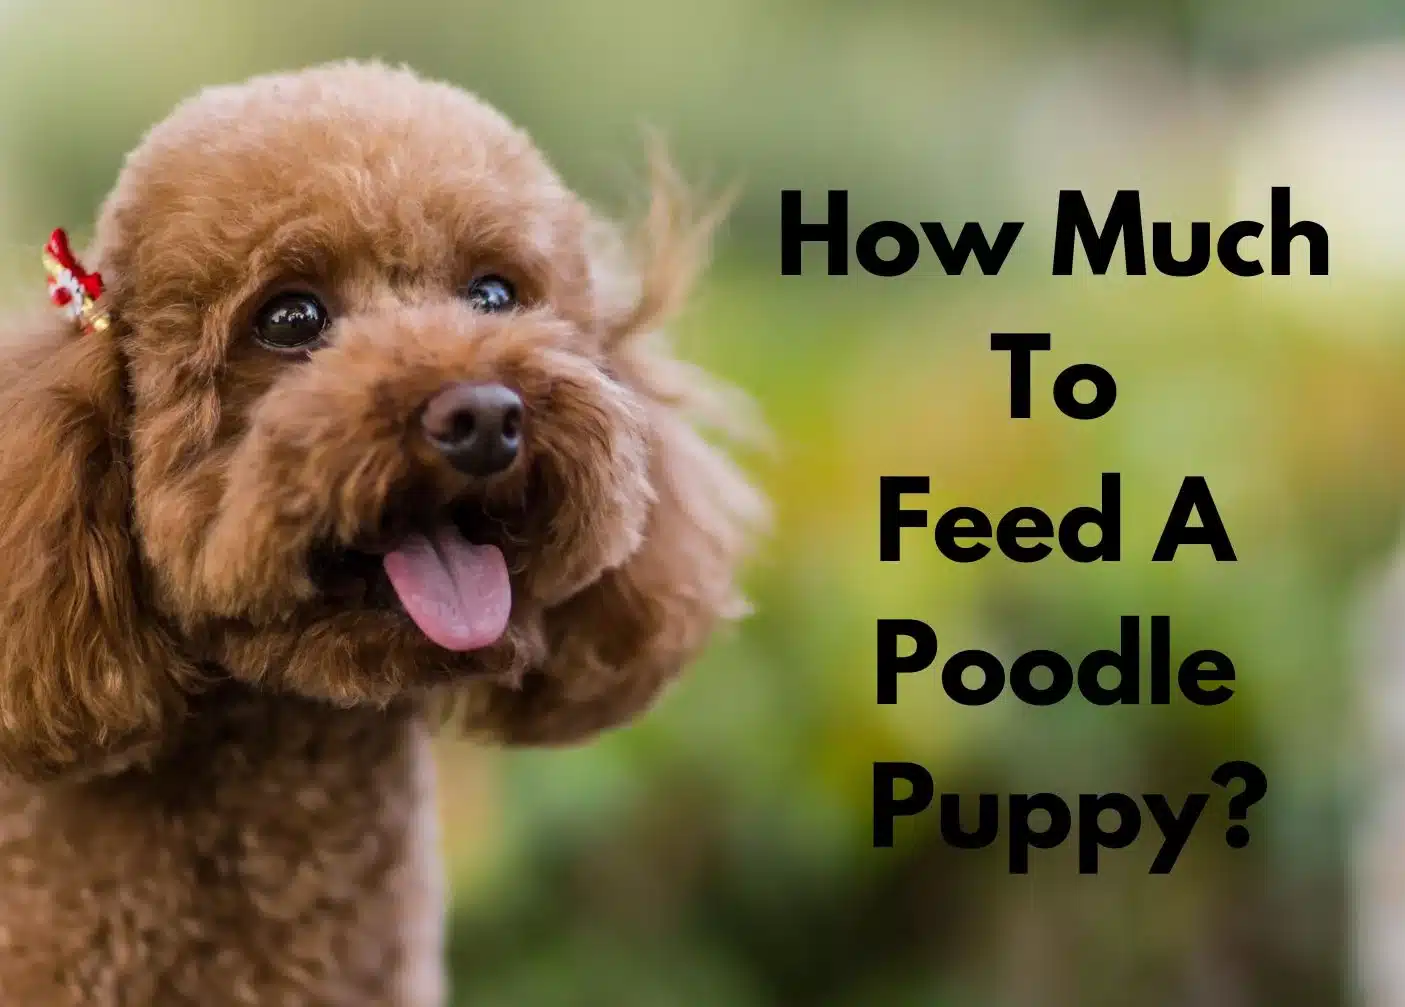 a poodle with red clip on head | how much to feed a poodle puppy?